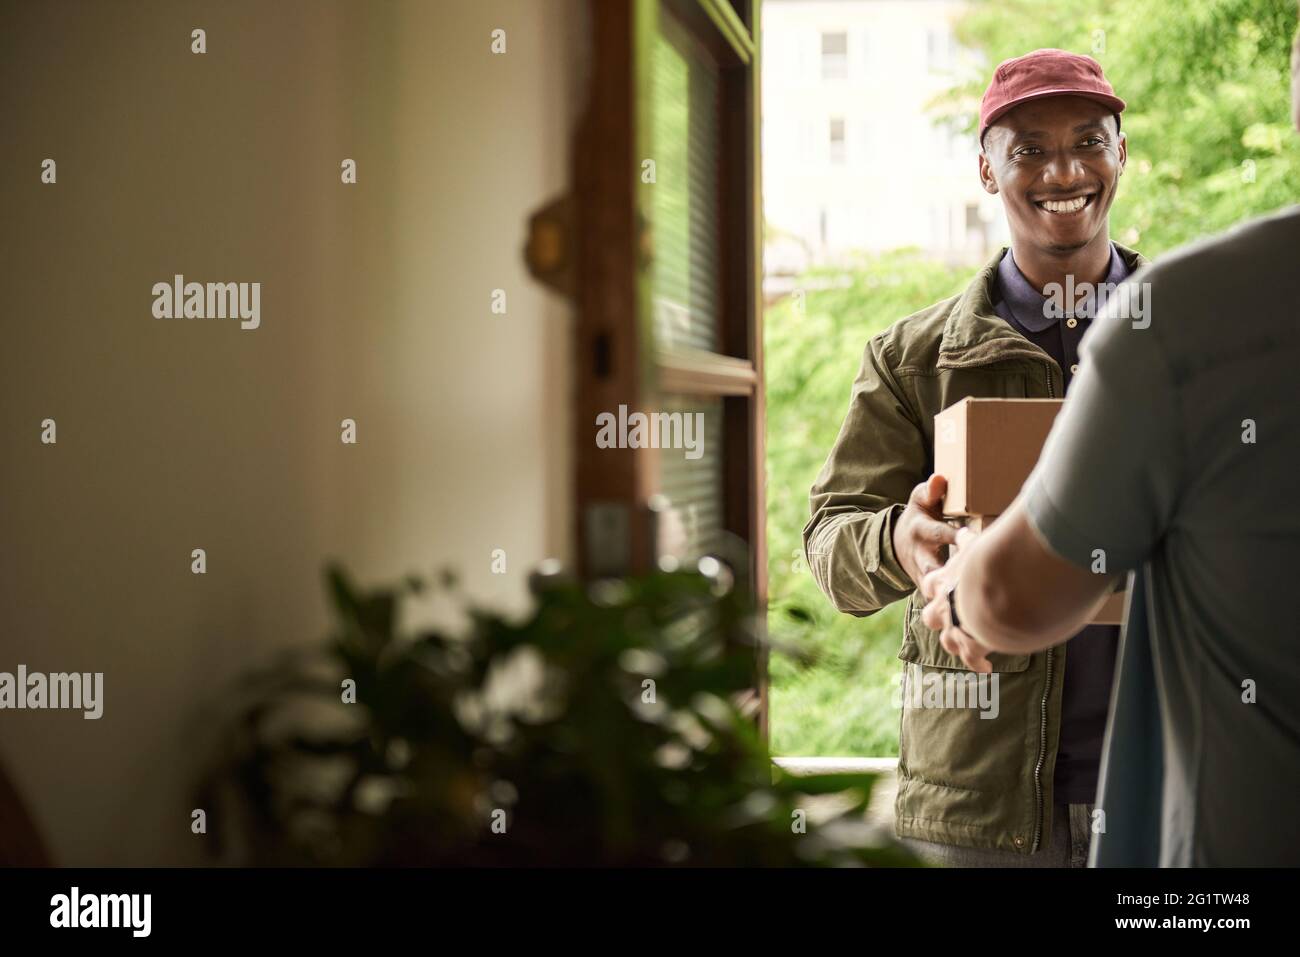 Smiling African courier handing packages to a customer Stock Photo